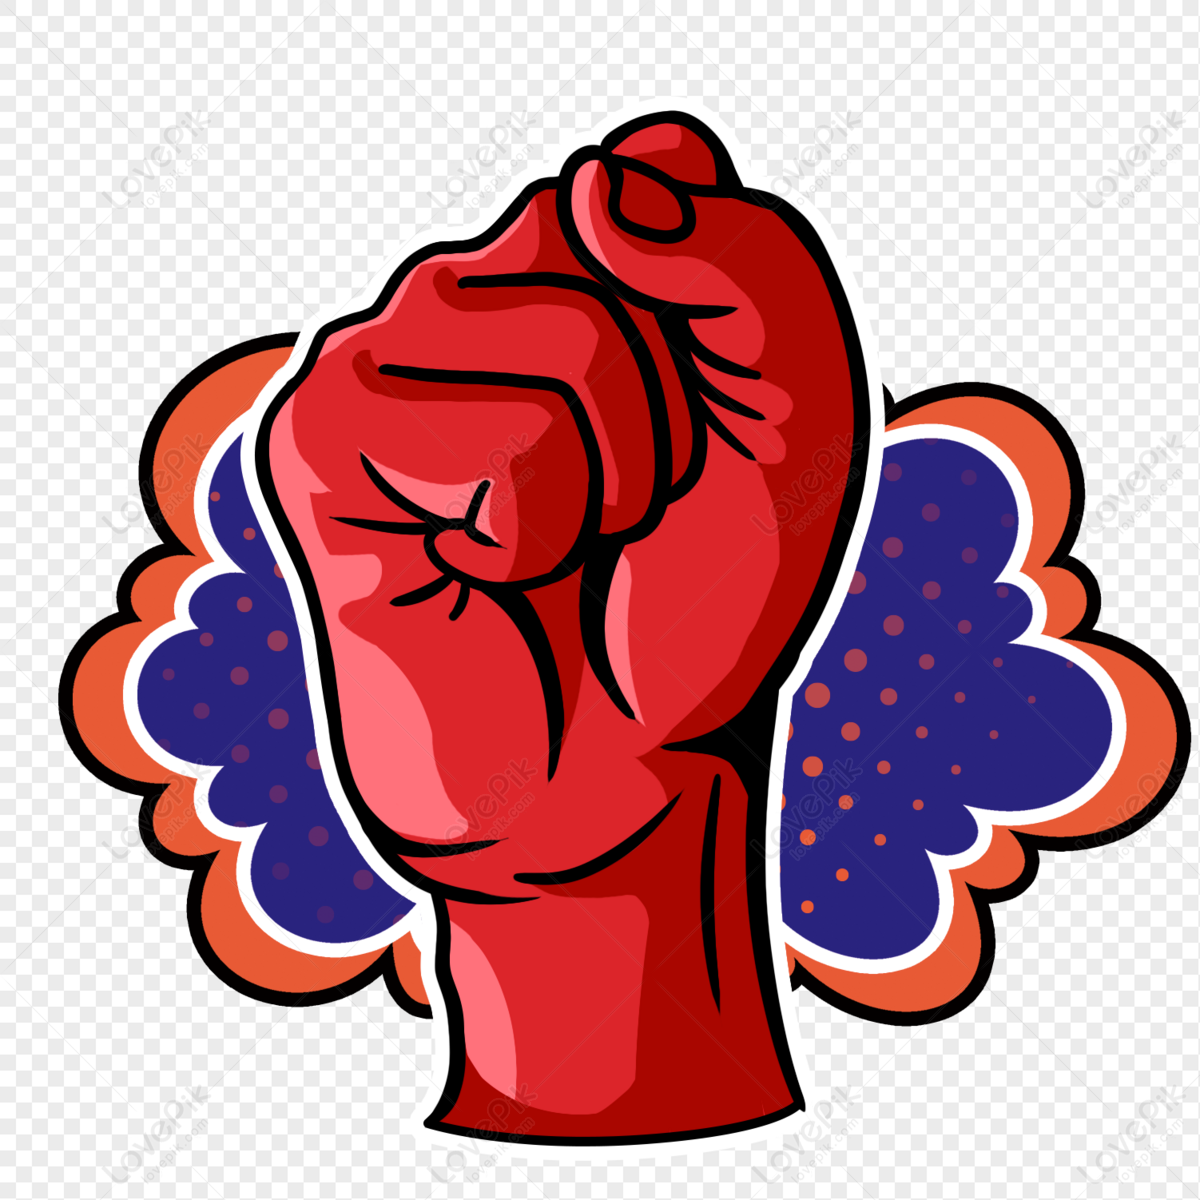 Cartoon Fist PNG Image And Clipart Image For Free Download - Lovepik |  401011768